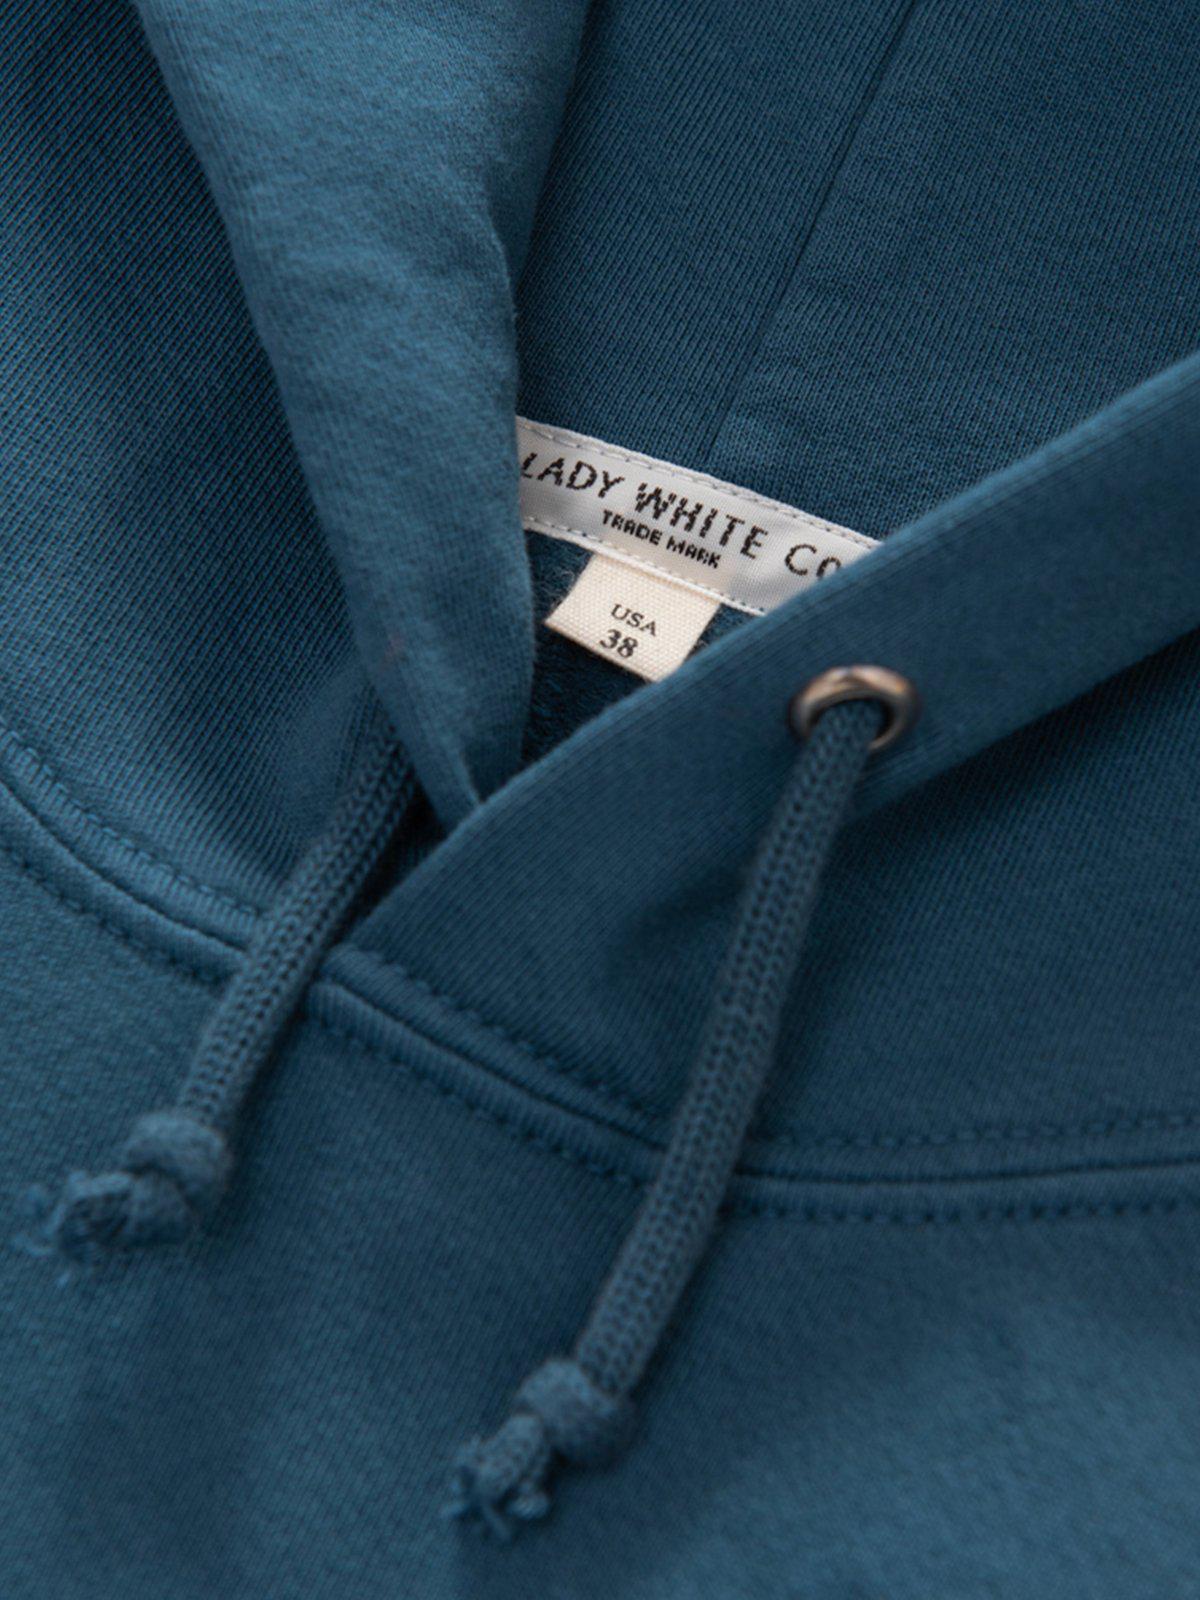 Lady White Co. Llewyn Hoodie Neptune Blue - MORE by Morello Indonesia